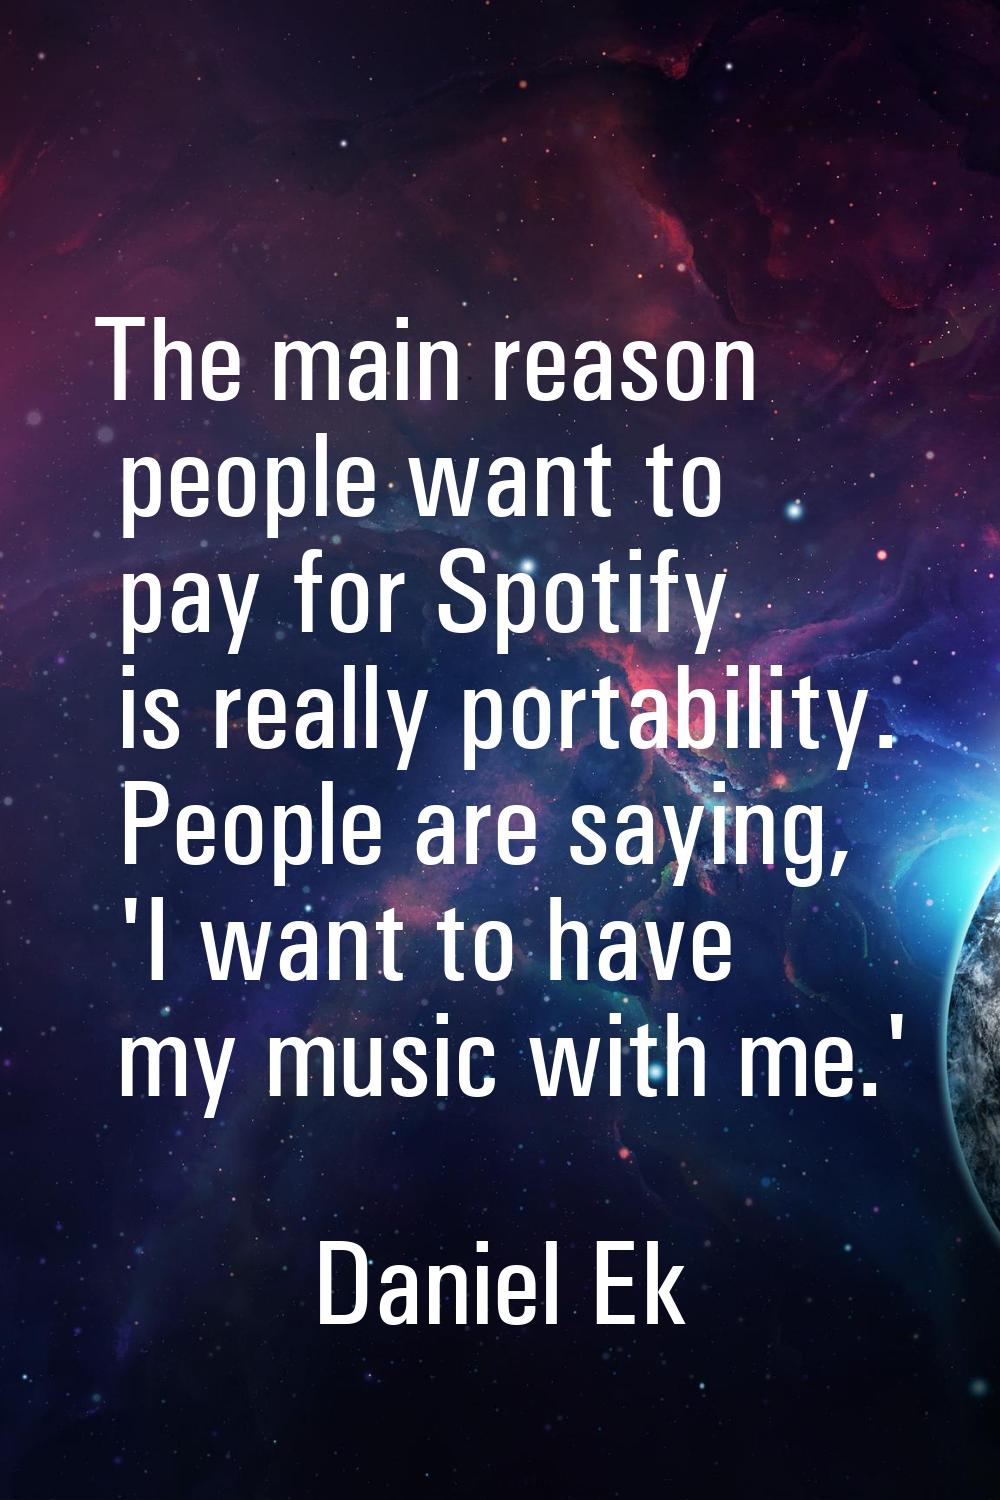 The main reason people want to pay for Spotify is really portability. People are saying, 'I want to